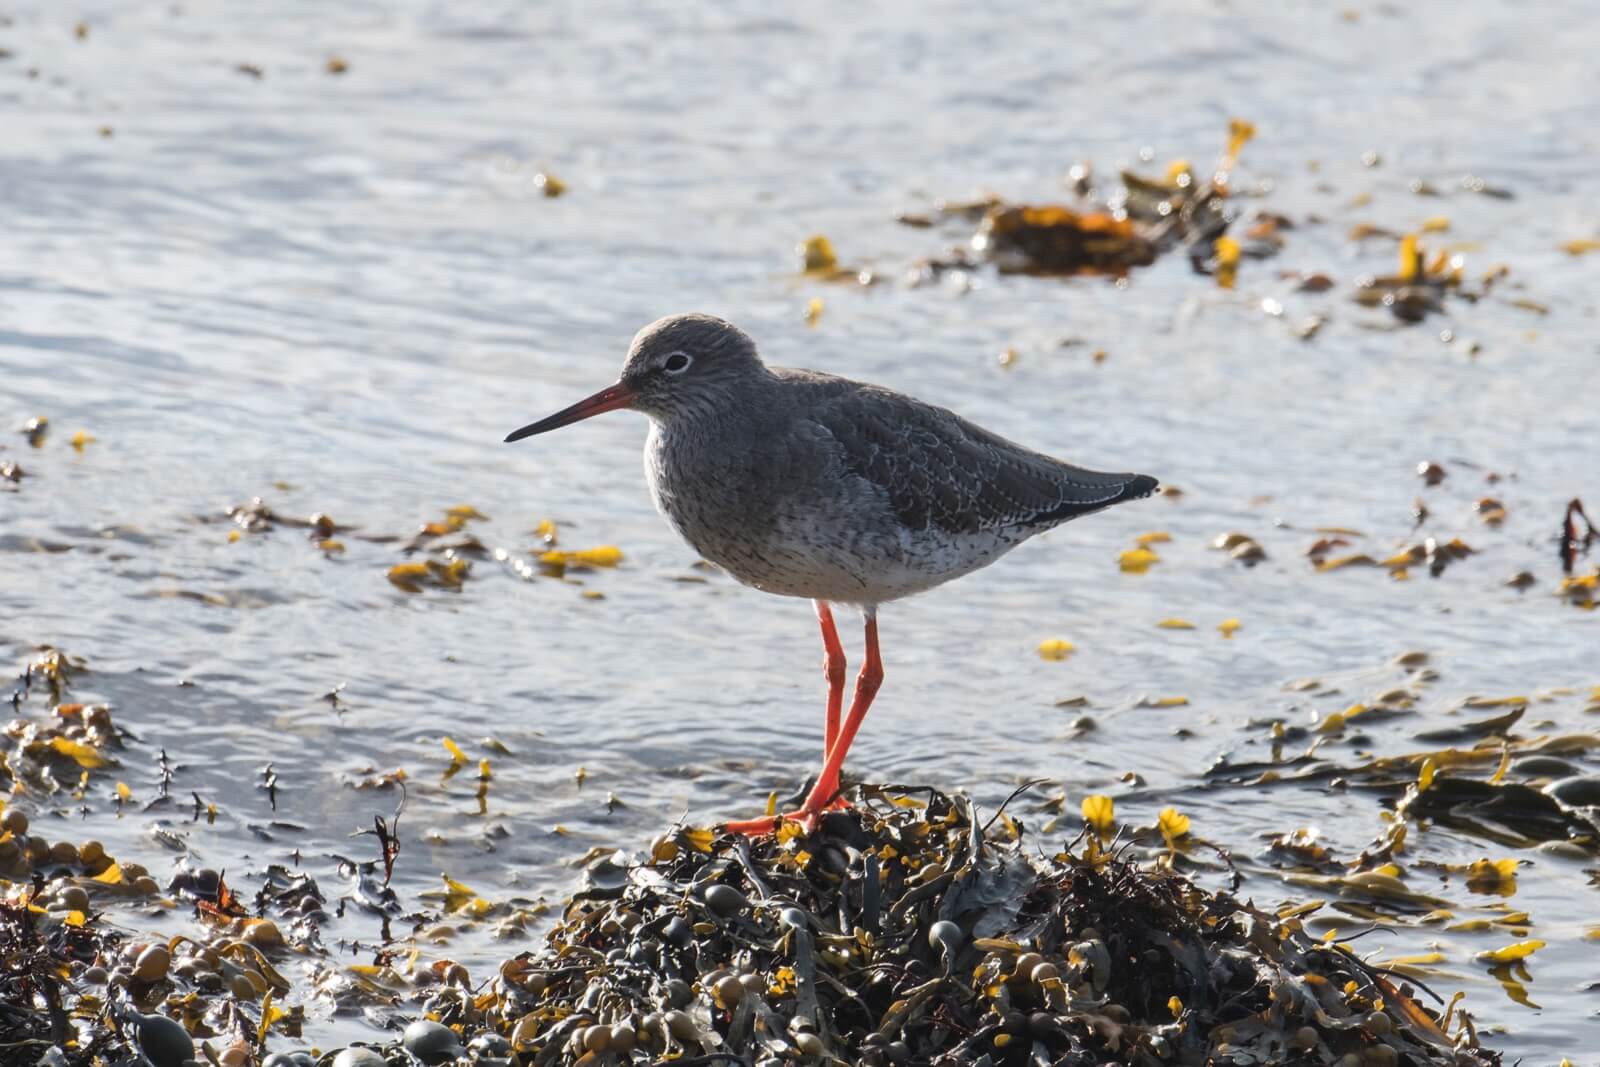 Redshank at Scapa - photo by Charles Tait